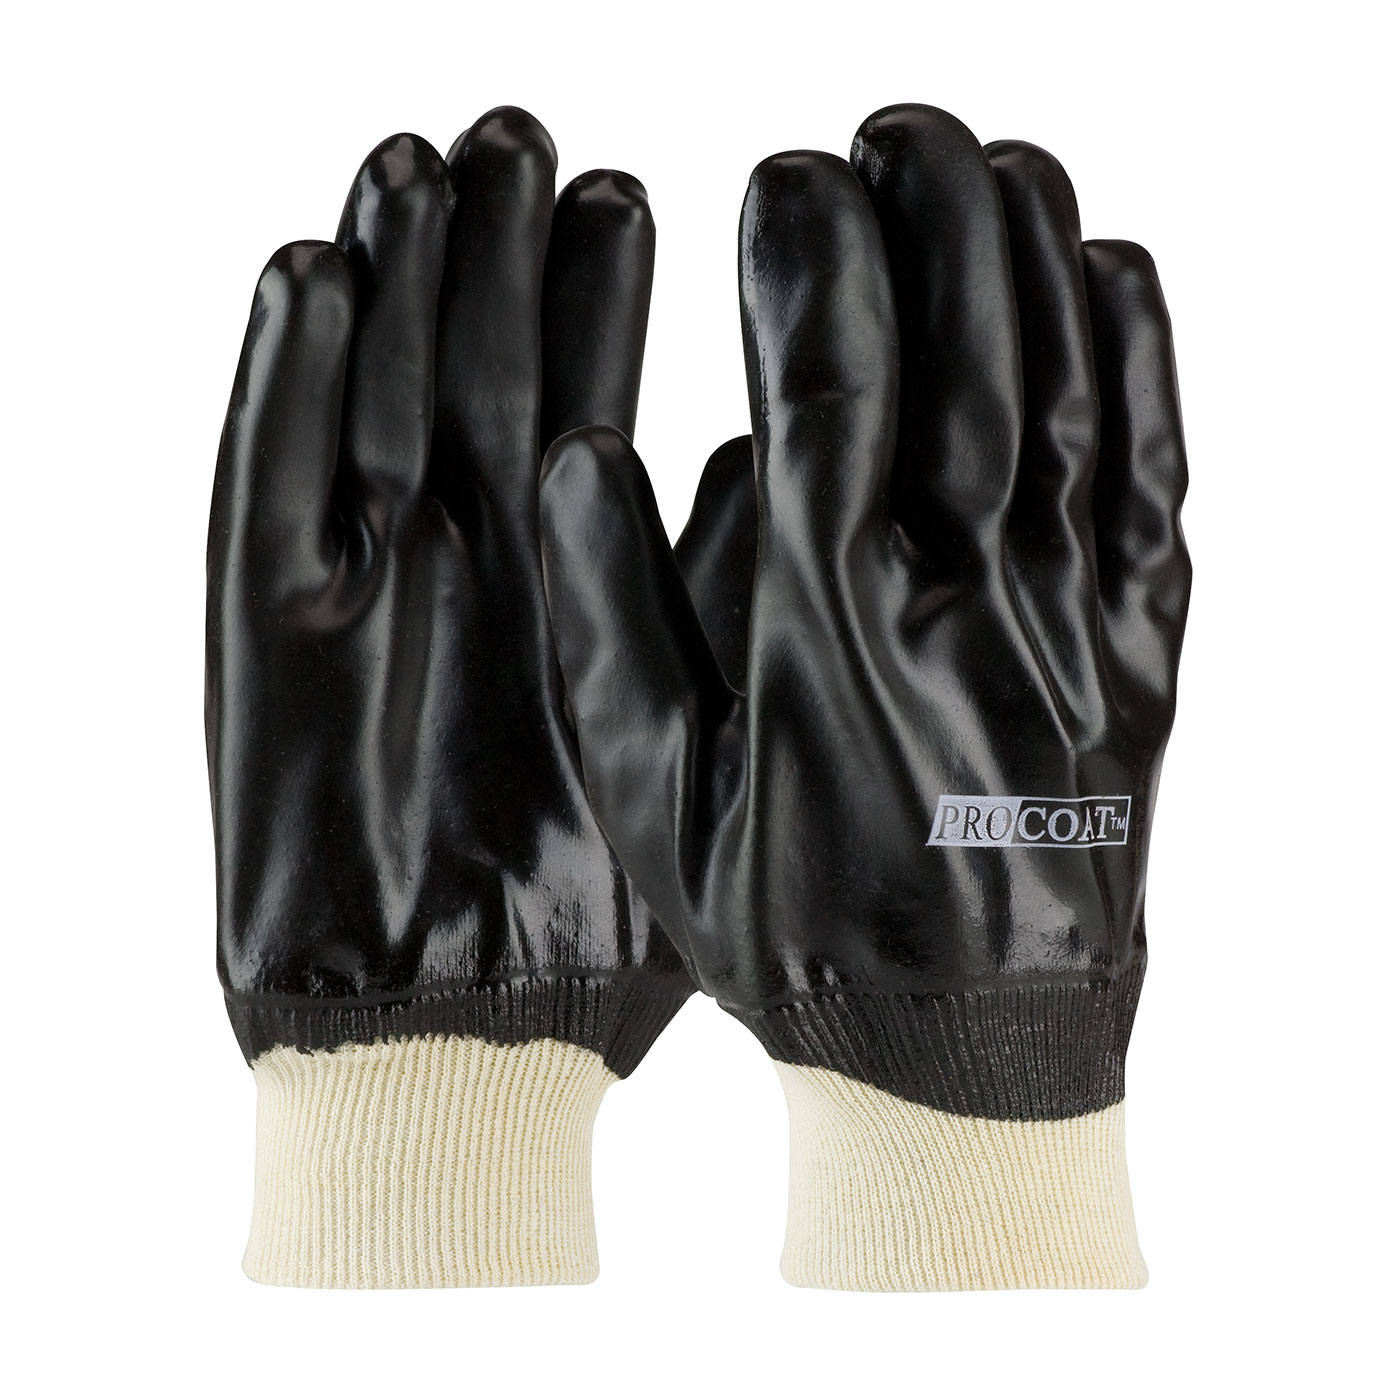 PIP 58-8015 ProCoat PVC Dipped Glove with Interlock Liner and Smooth Finish - Knitwrist PID-58 8015